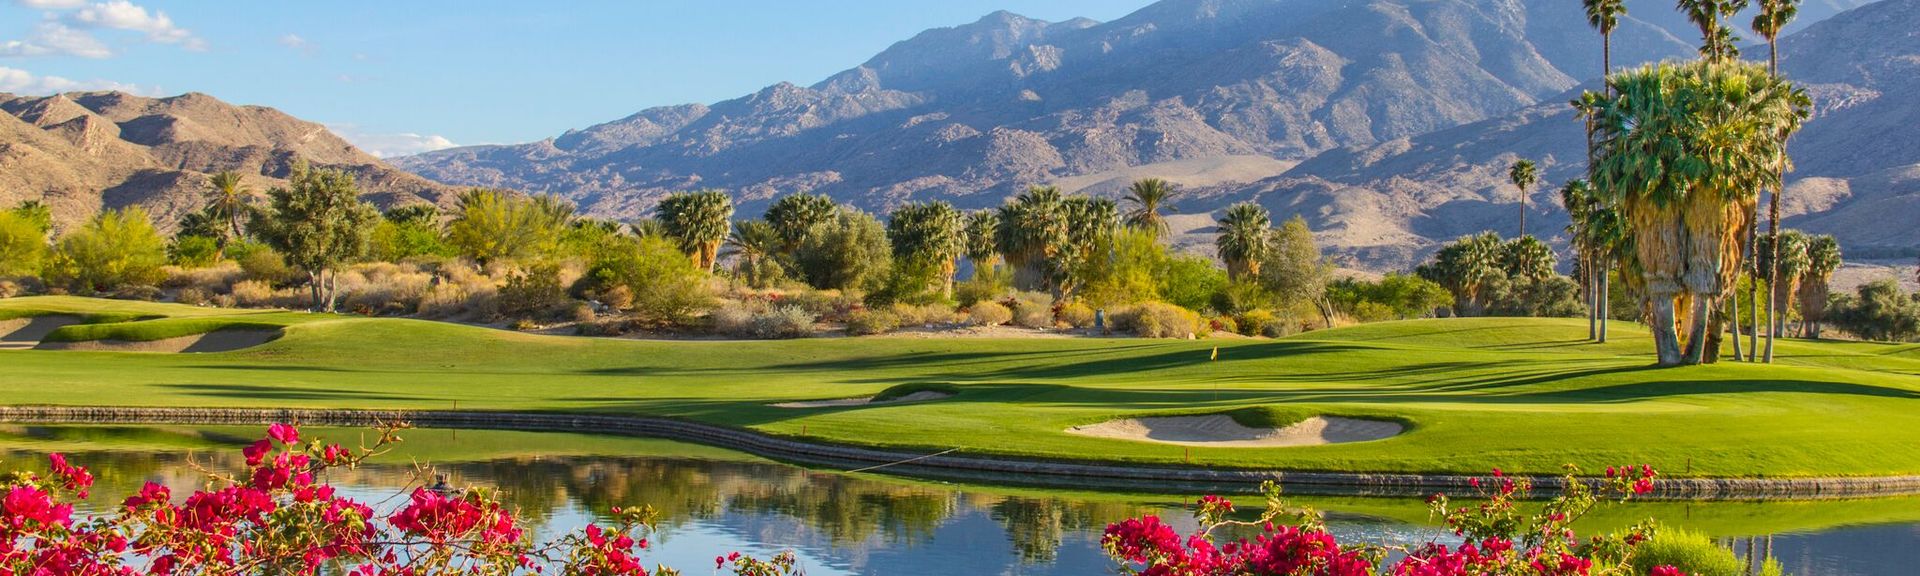 Palm Springs, CA vacation rentals Houses & more HomeAway